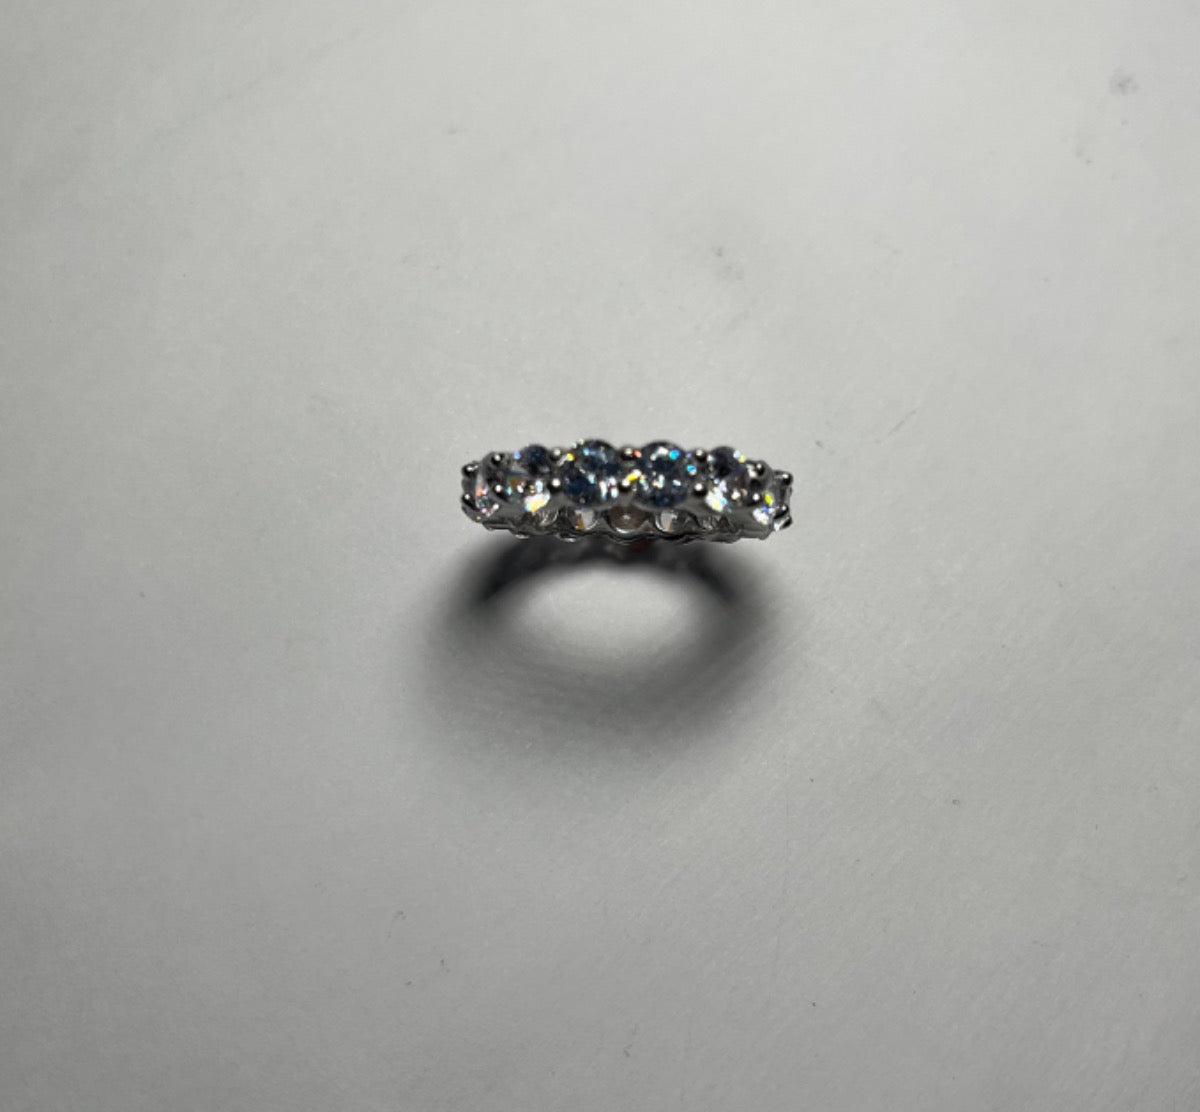 Silver  Wedding Band with CZ